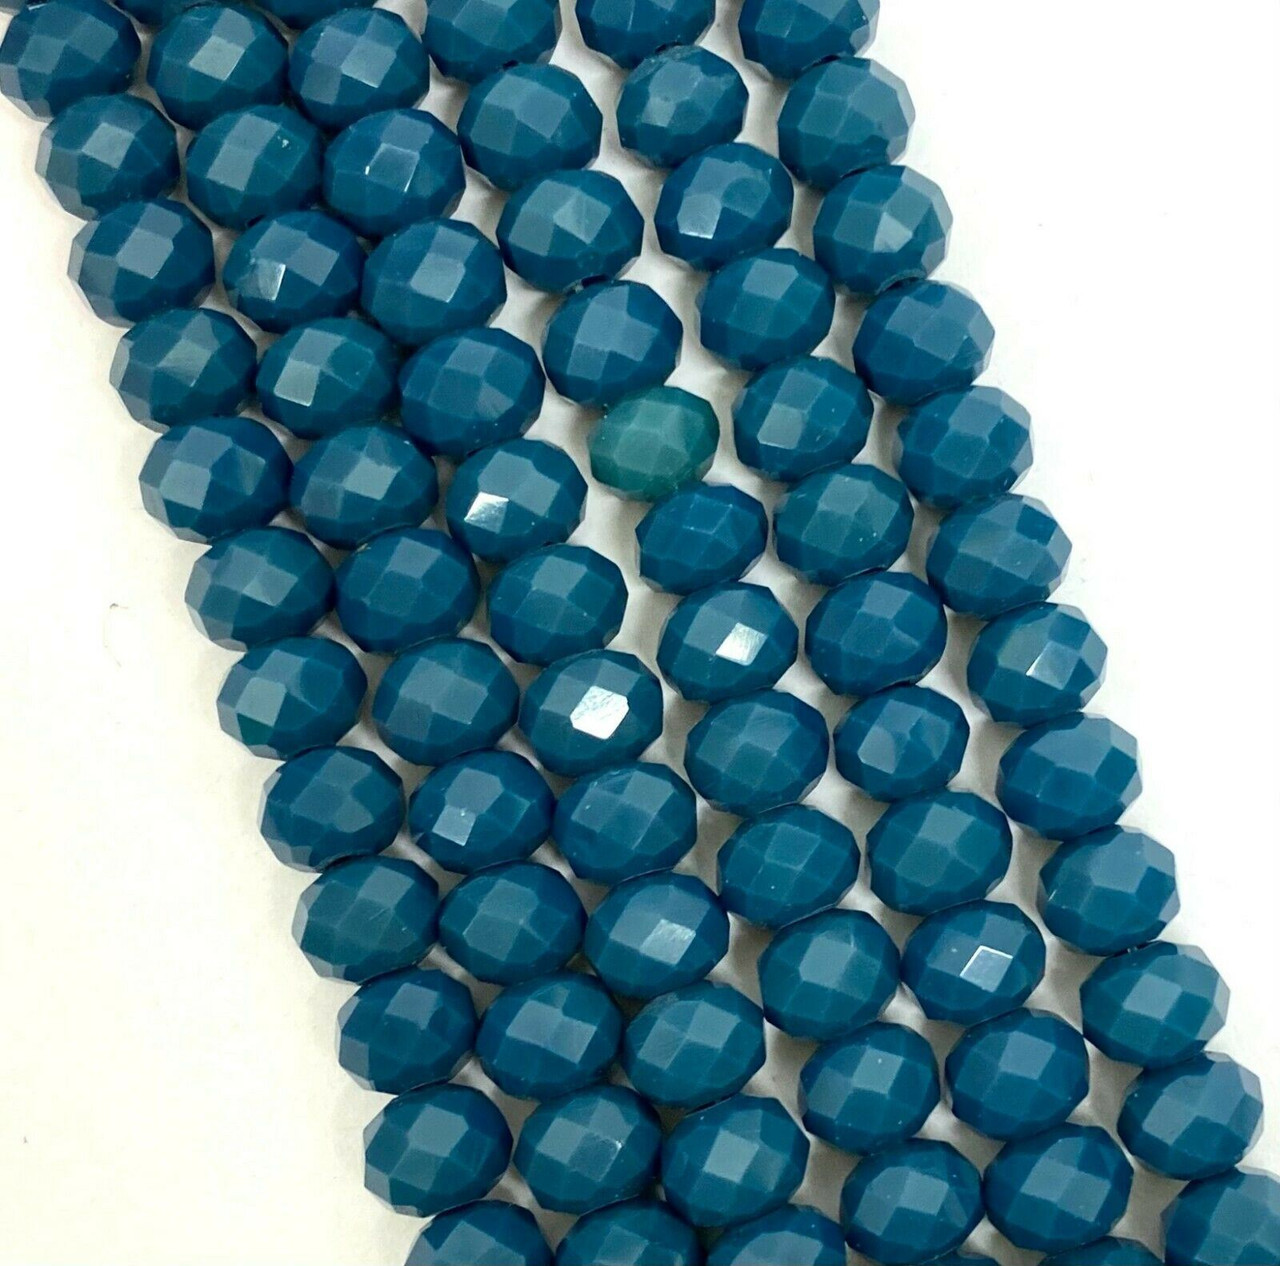 3.5x2.5mm Faceted Glass Rondelles - TEAL OPAQUE - approx 15" strand (approx 150 beads)